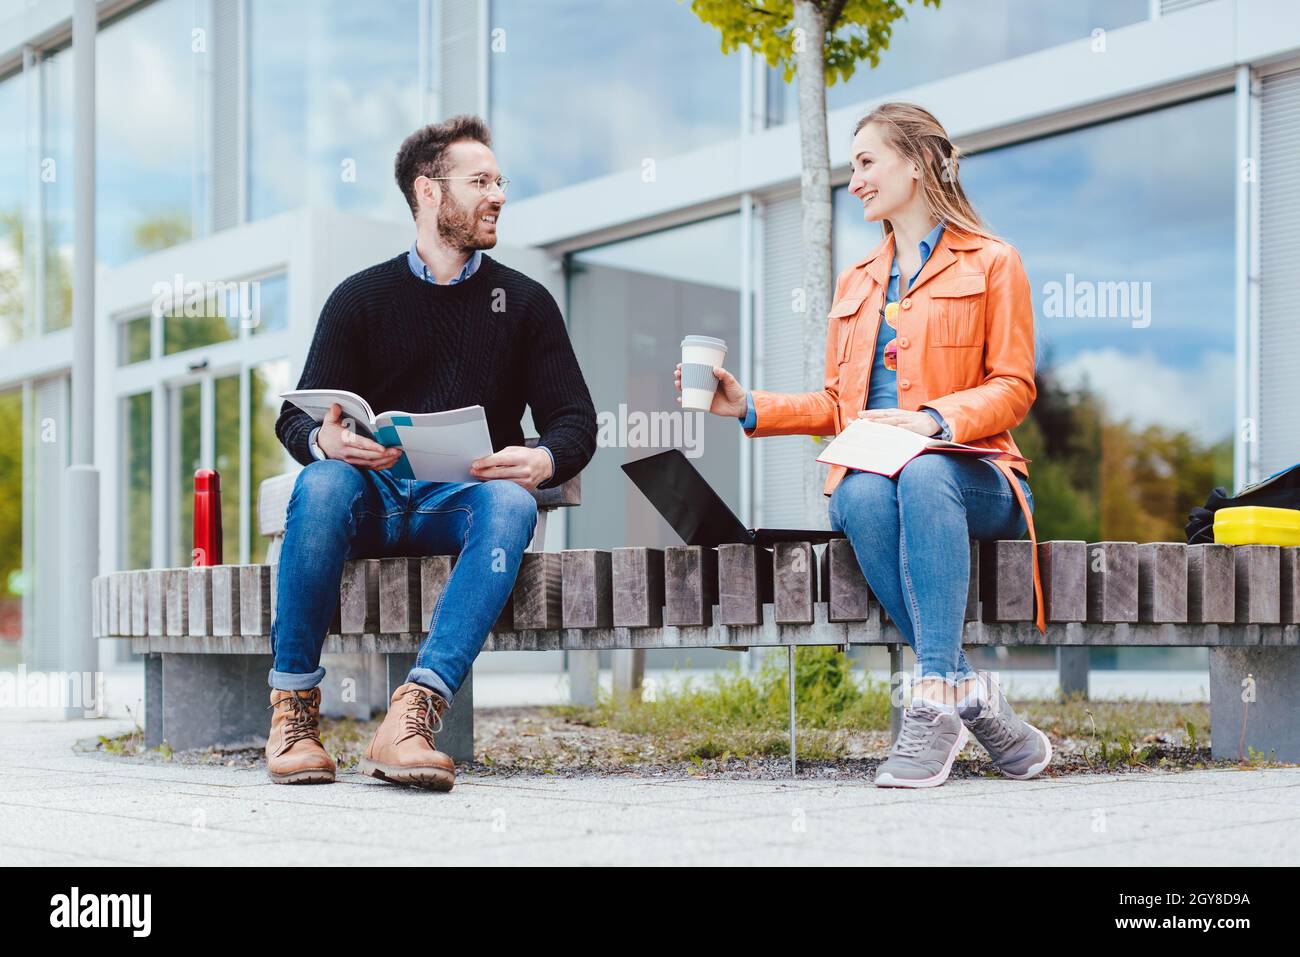 Man and woman student chatting on university campus in front of main building Stock Photo